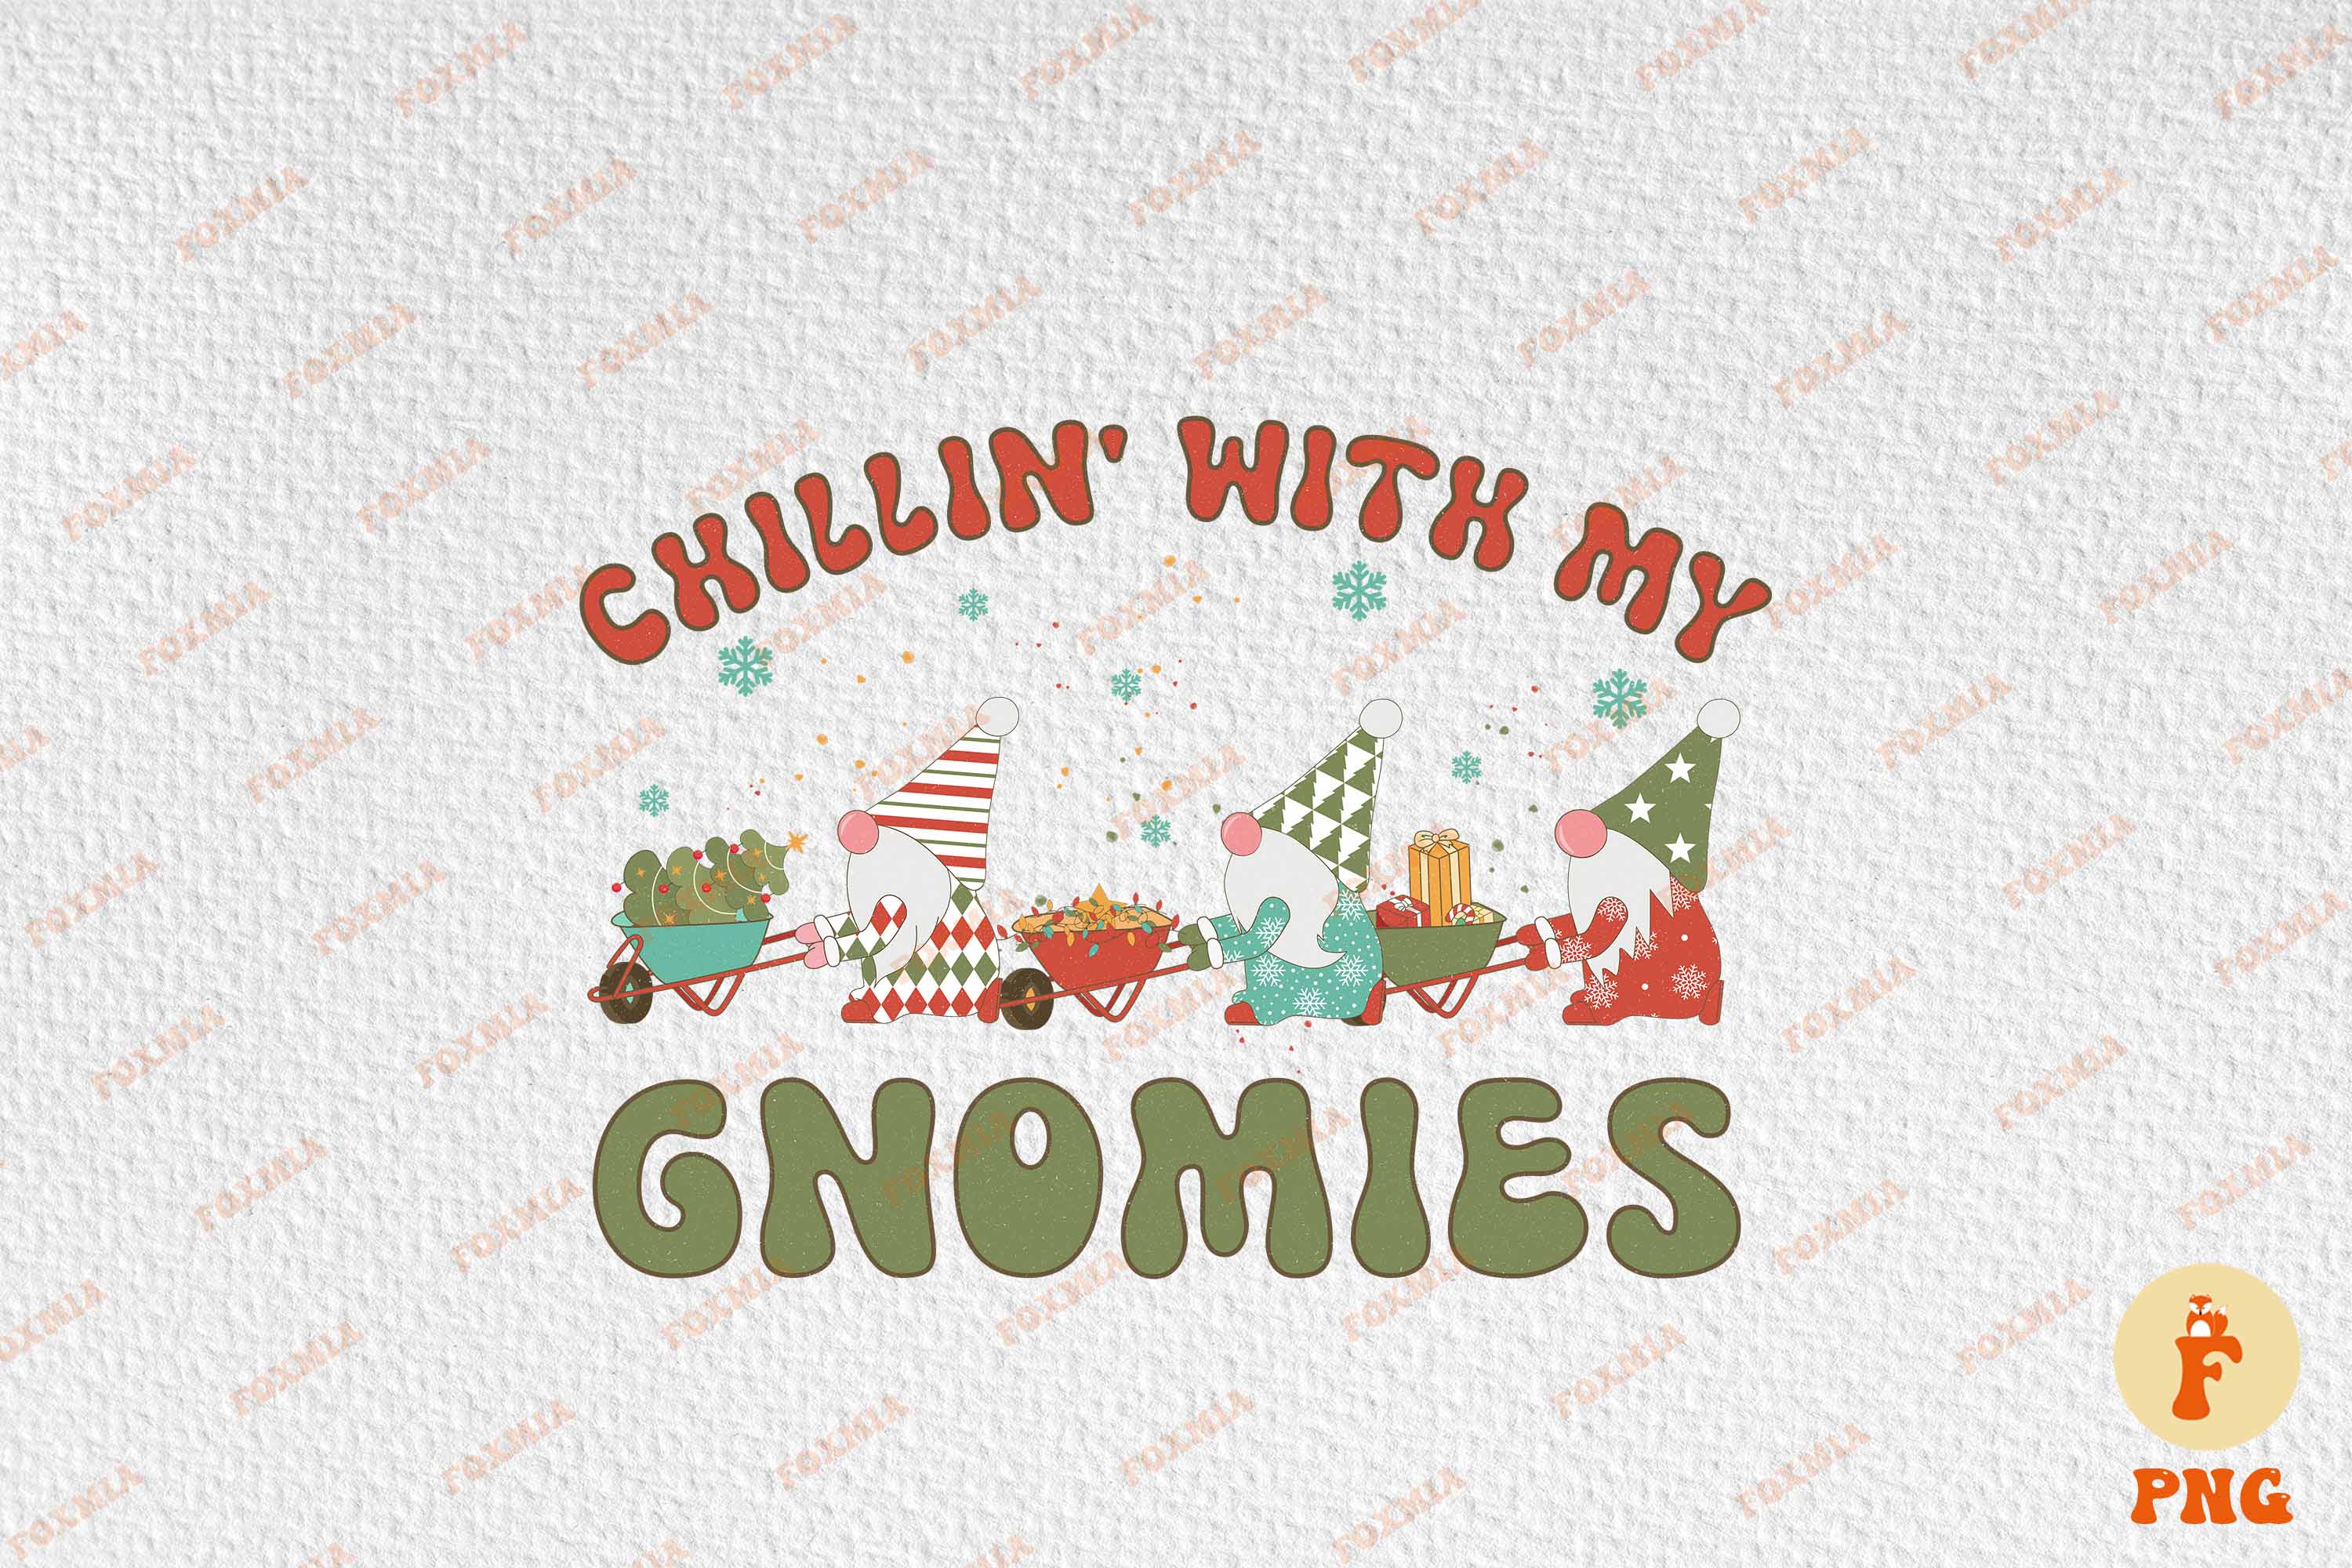 Chilling vibes with gnomies.